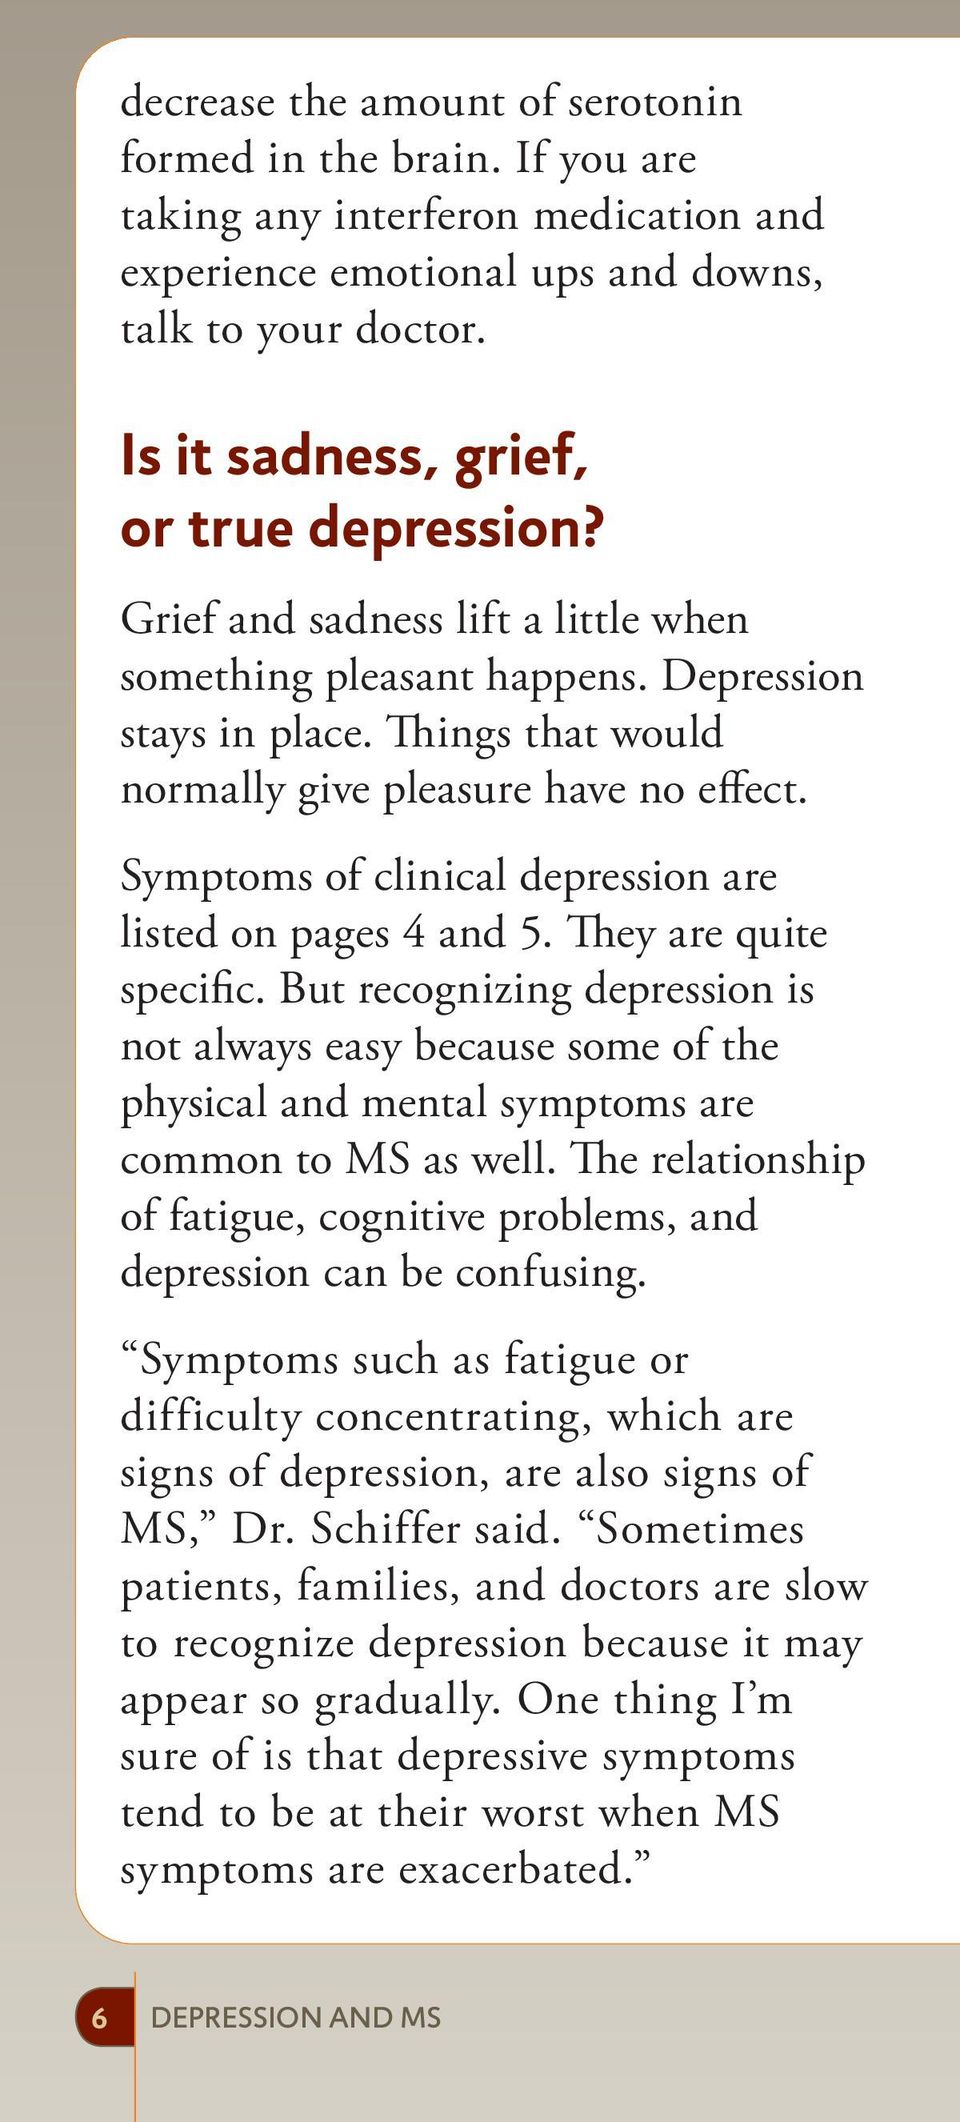 Symptoms of clinical depression are listed on pages 4 and 5. They are quite specific.